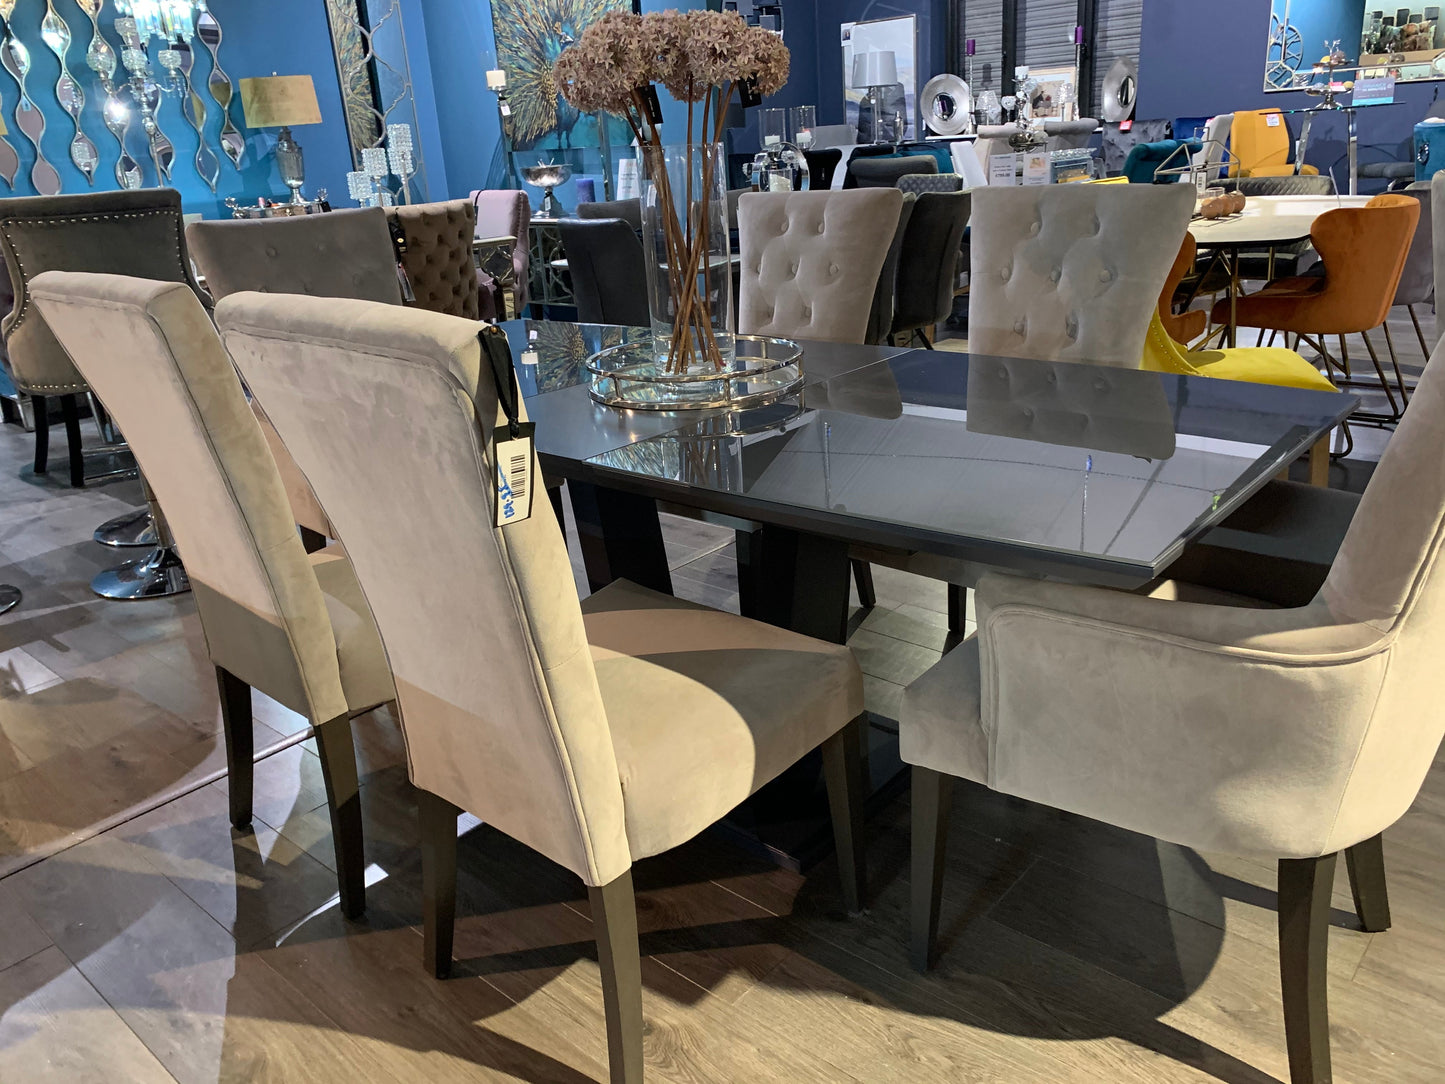 Set of 3 chairs  Langham  SPECIAL CLEARANCE PRICE view instore to purchase